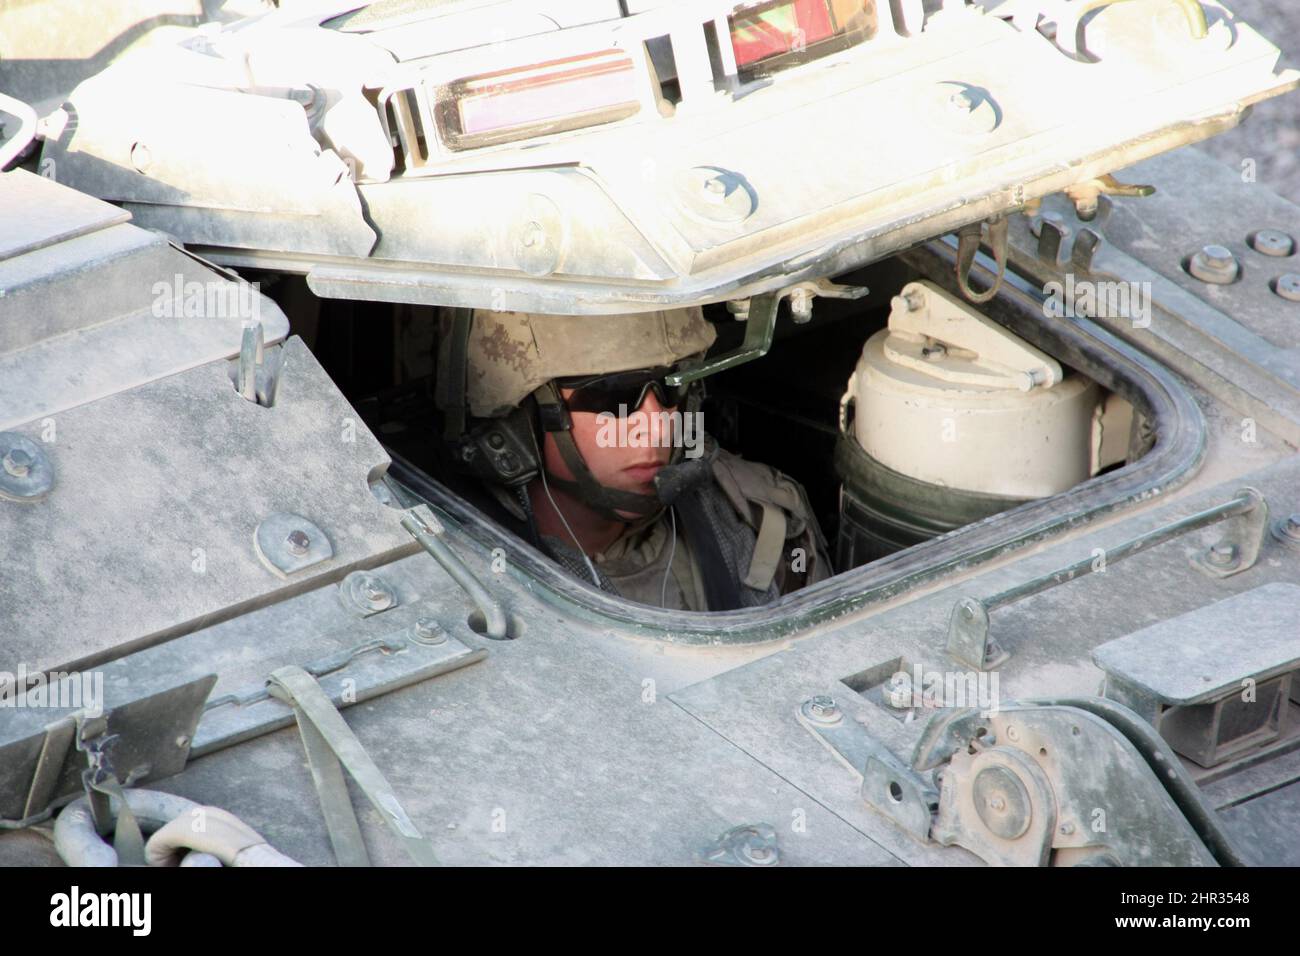 Cpl Mark Evers is seen in the driverÂ’s seat of a LAV at the Panjwaii District Centre just outside the Afghan town of Bazar-e Panjwaii on Monday, April 18, 2011. (AP Photo/The Canadian Press, Colin Perkel) Stock Photo